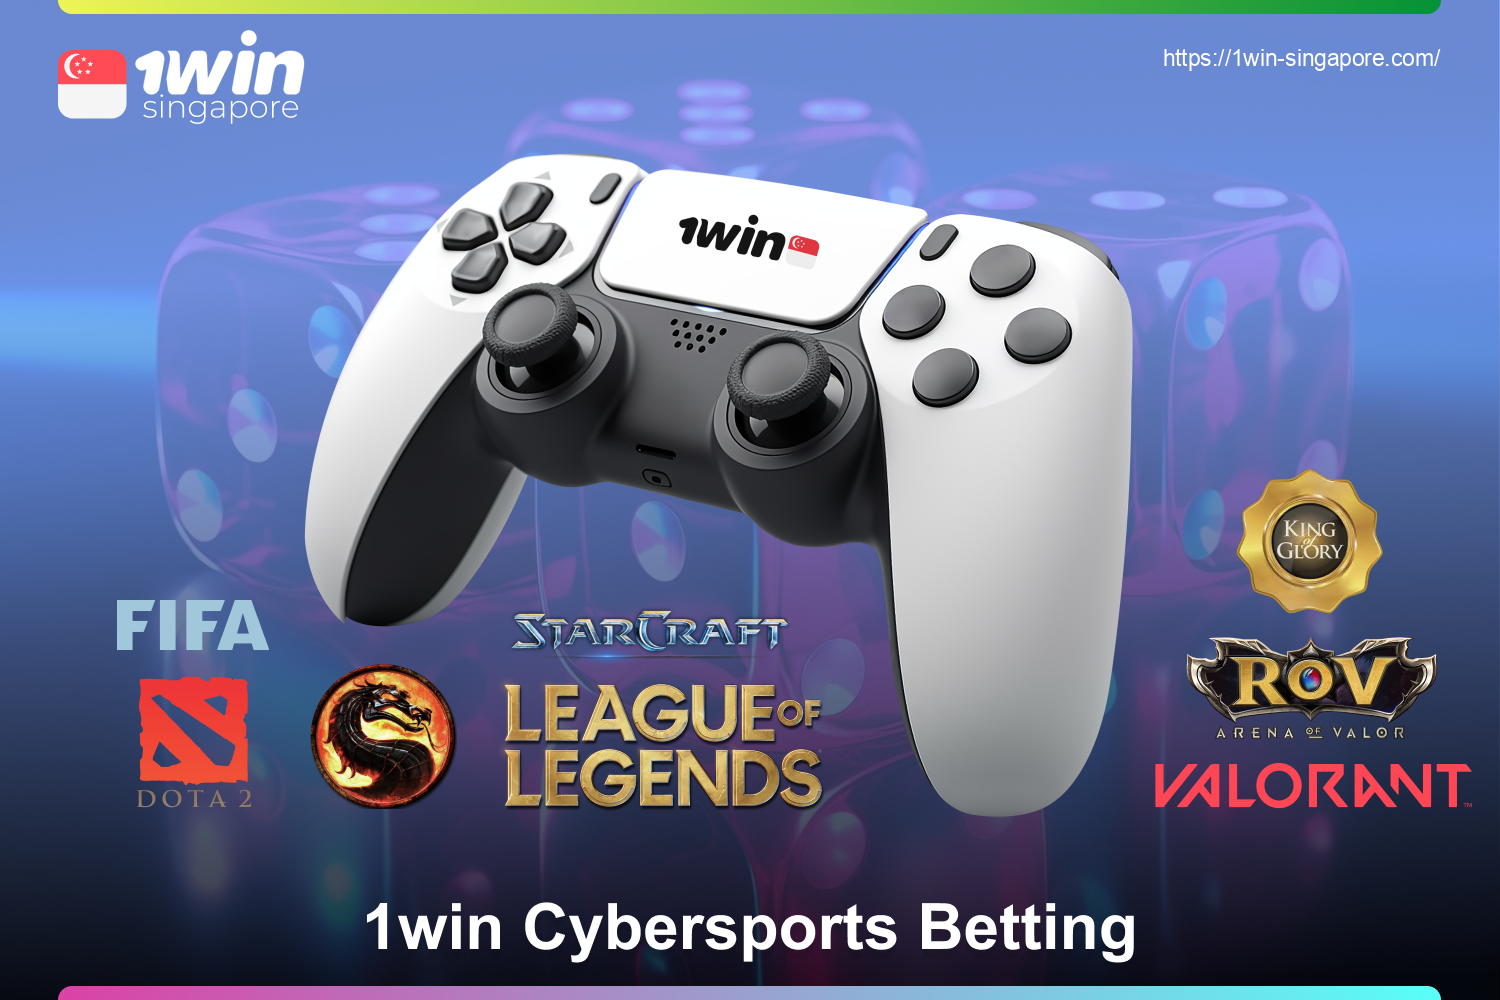 All popular esports disciplines are available for betting in Singapore at 1win